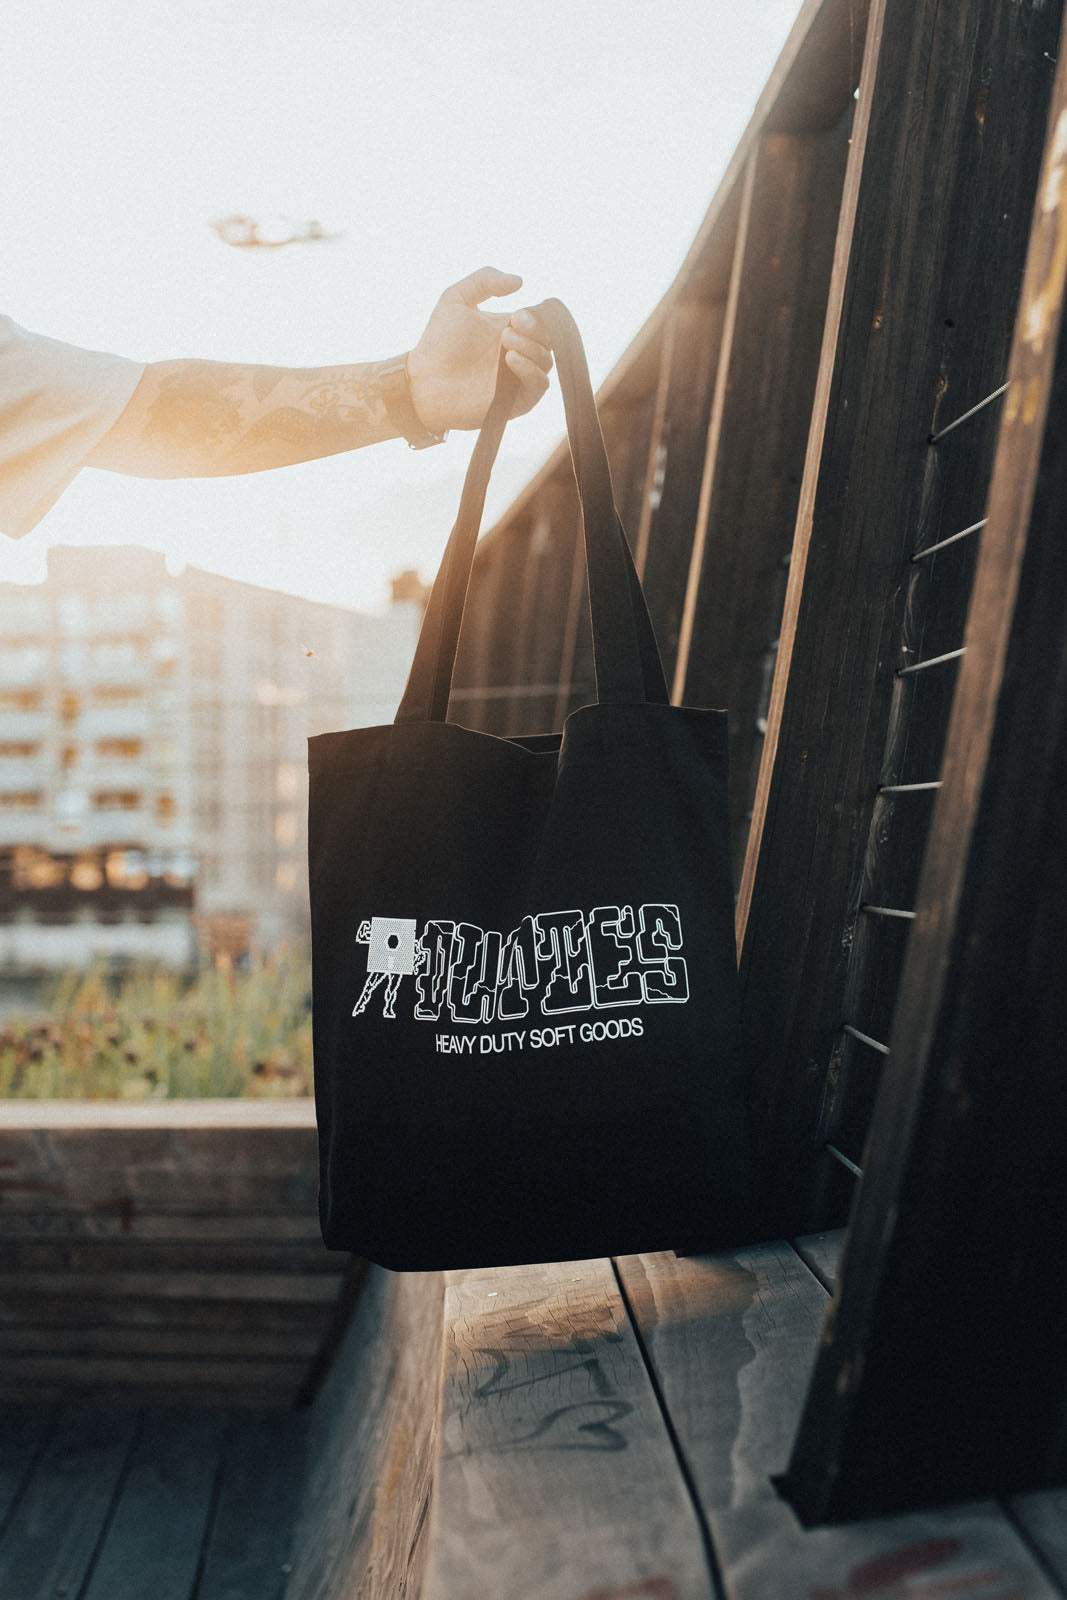 Arm holding up a black Tuff Tote outside, showcasing the white printed graphic on the fabric.